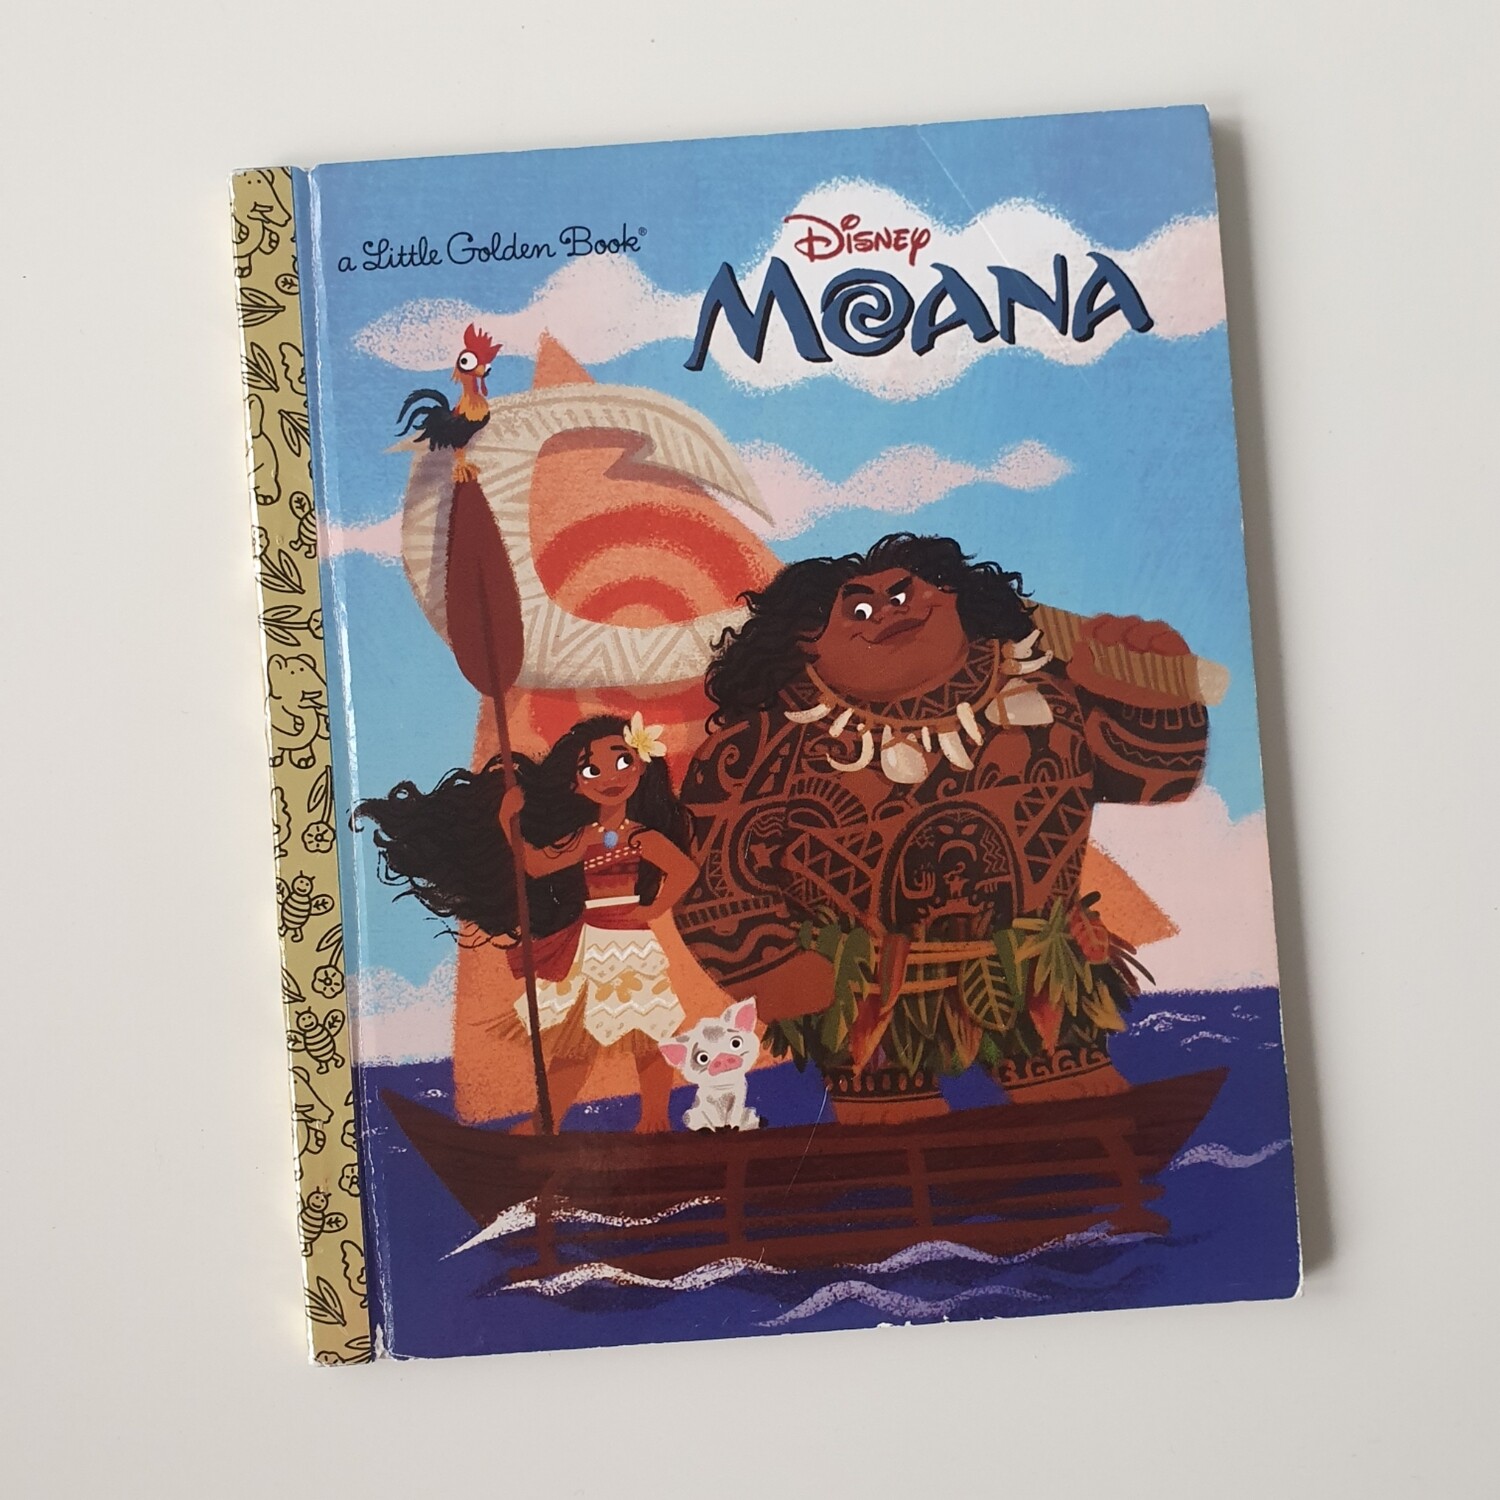 Moana Notebook - board book will come with metal book corners included